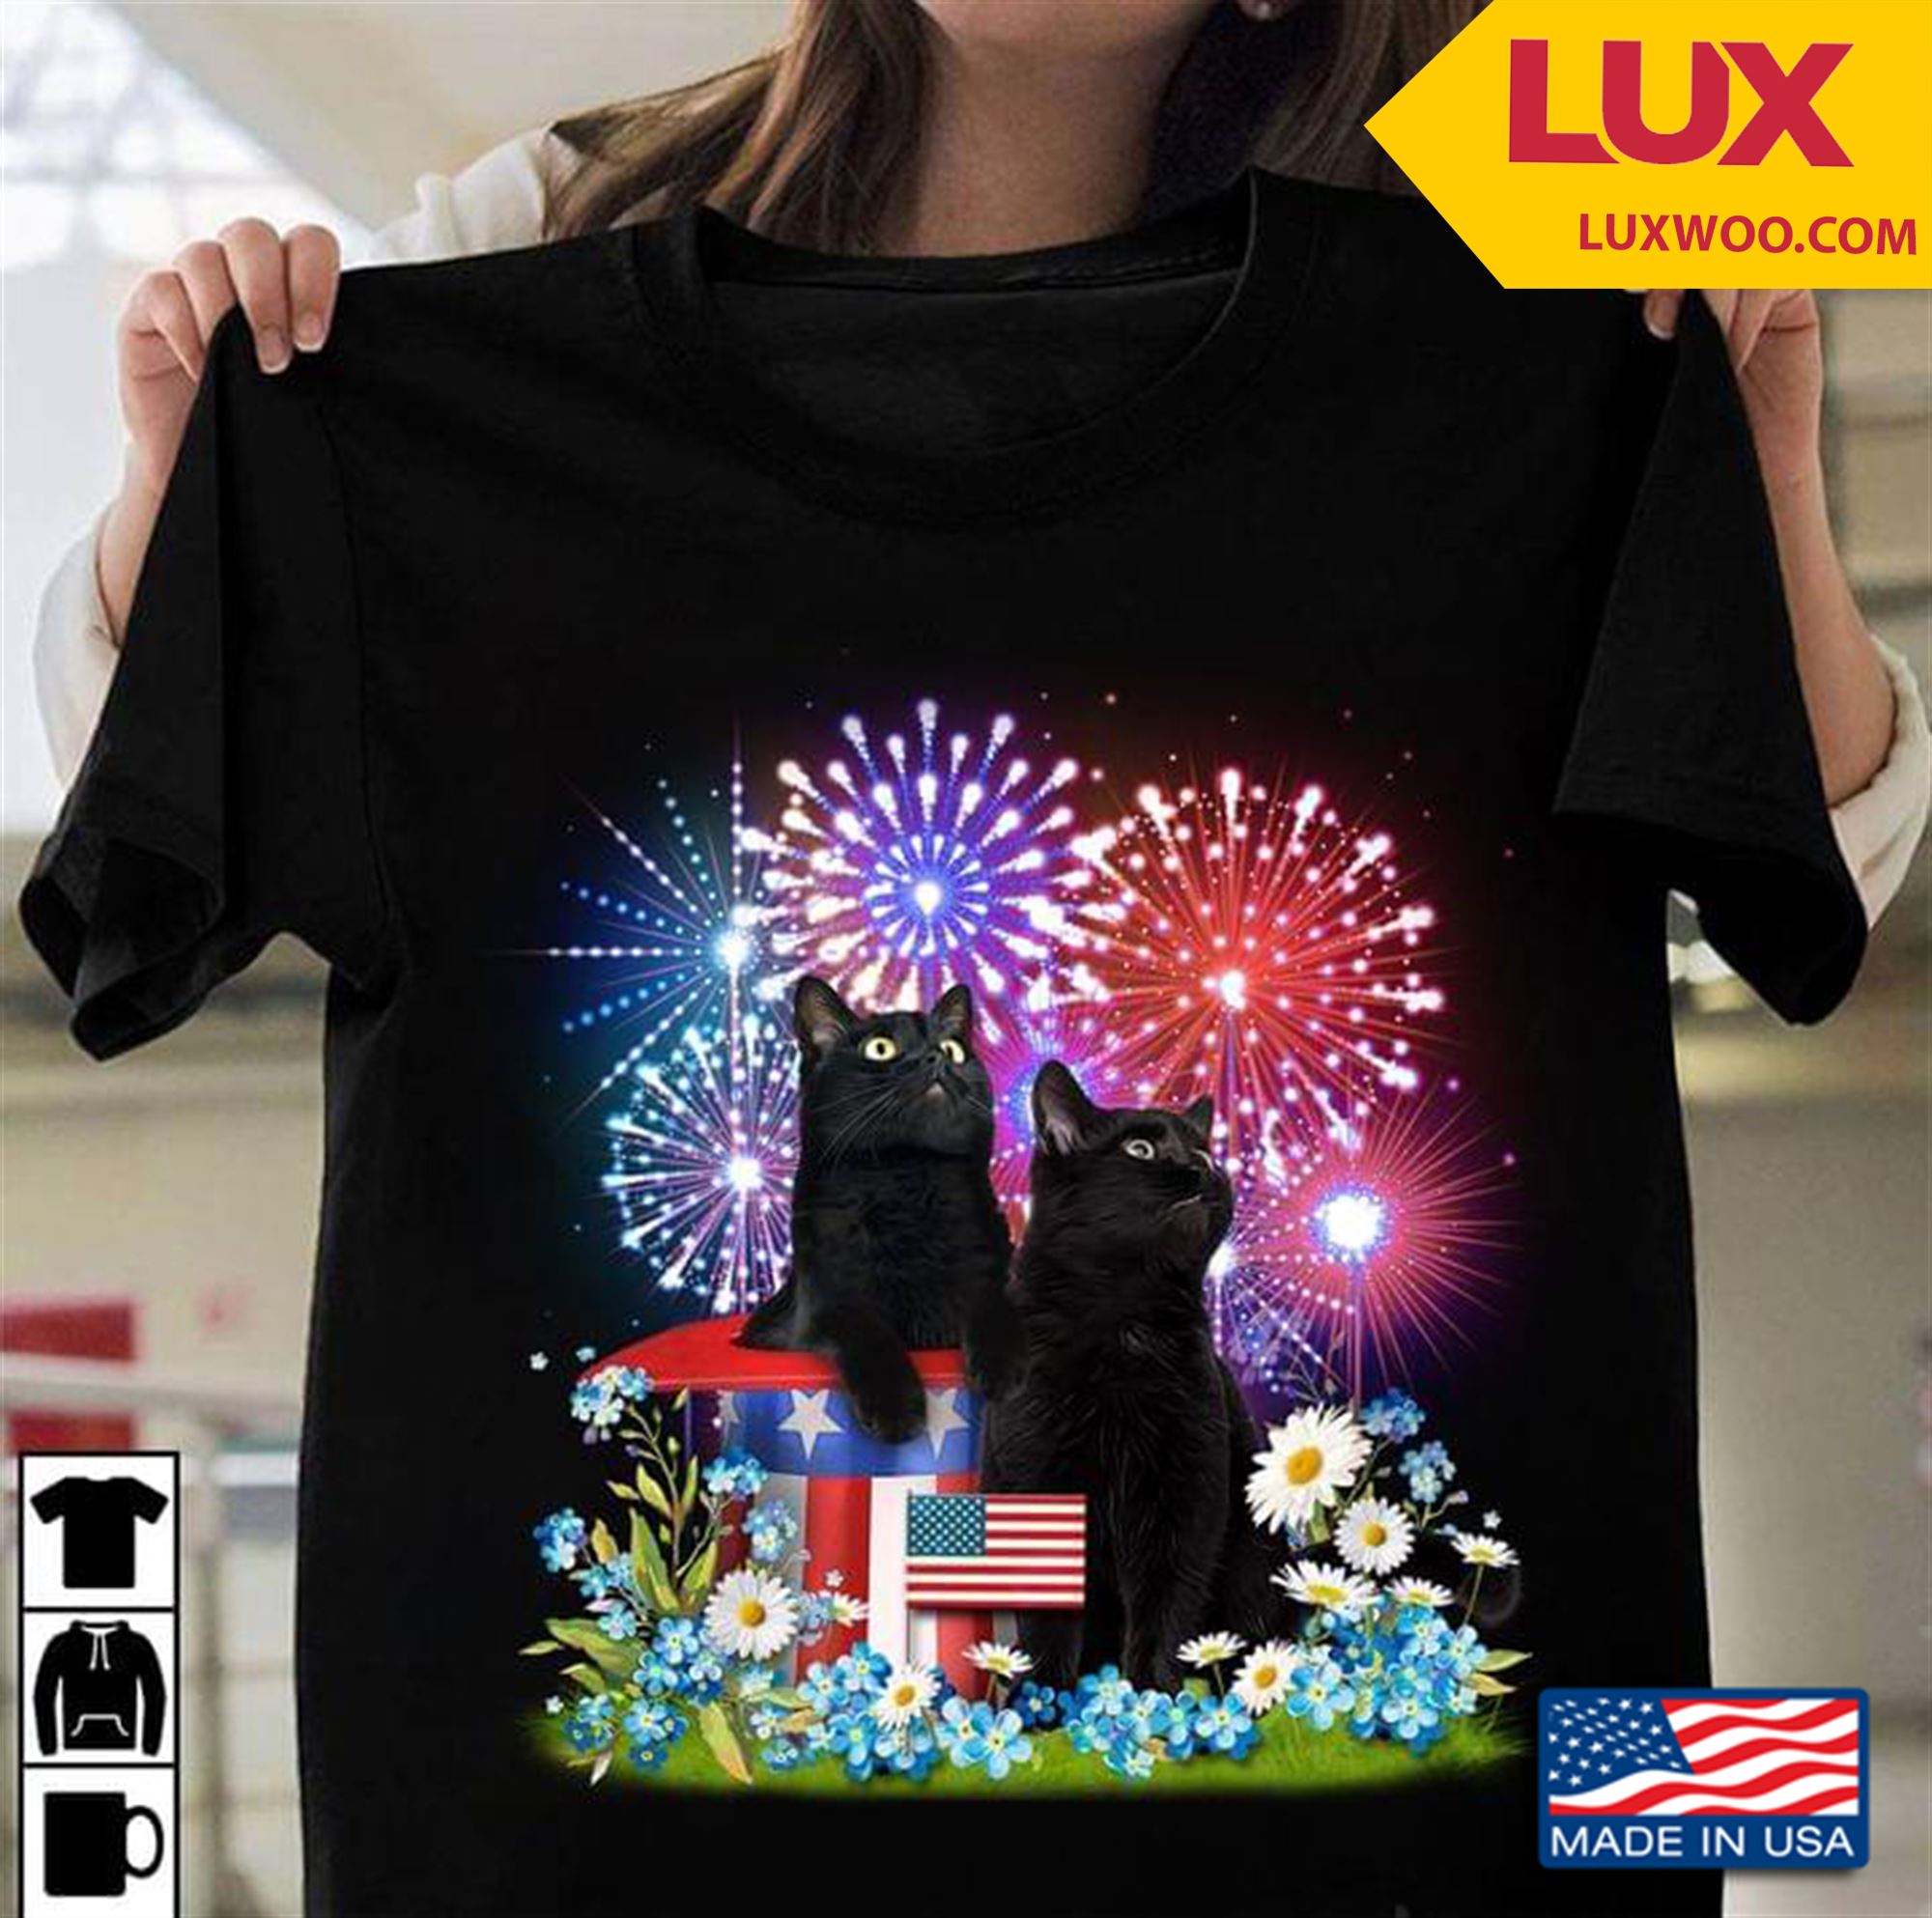 Black Cats And Fireworks 4th Of July Happy Independence Day Shirt Plus Size Up To 5xl